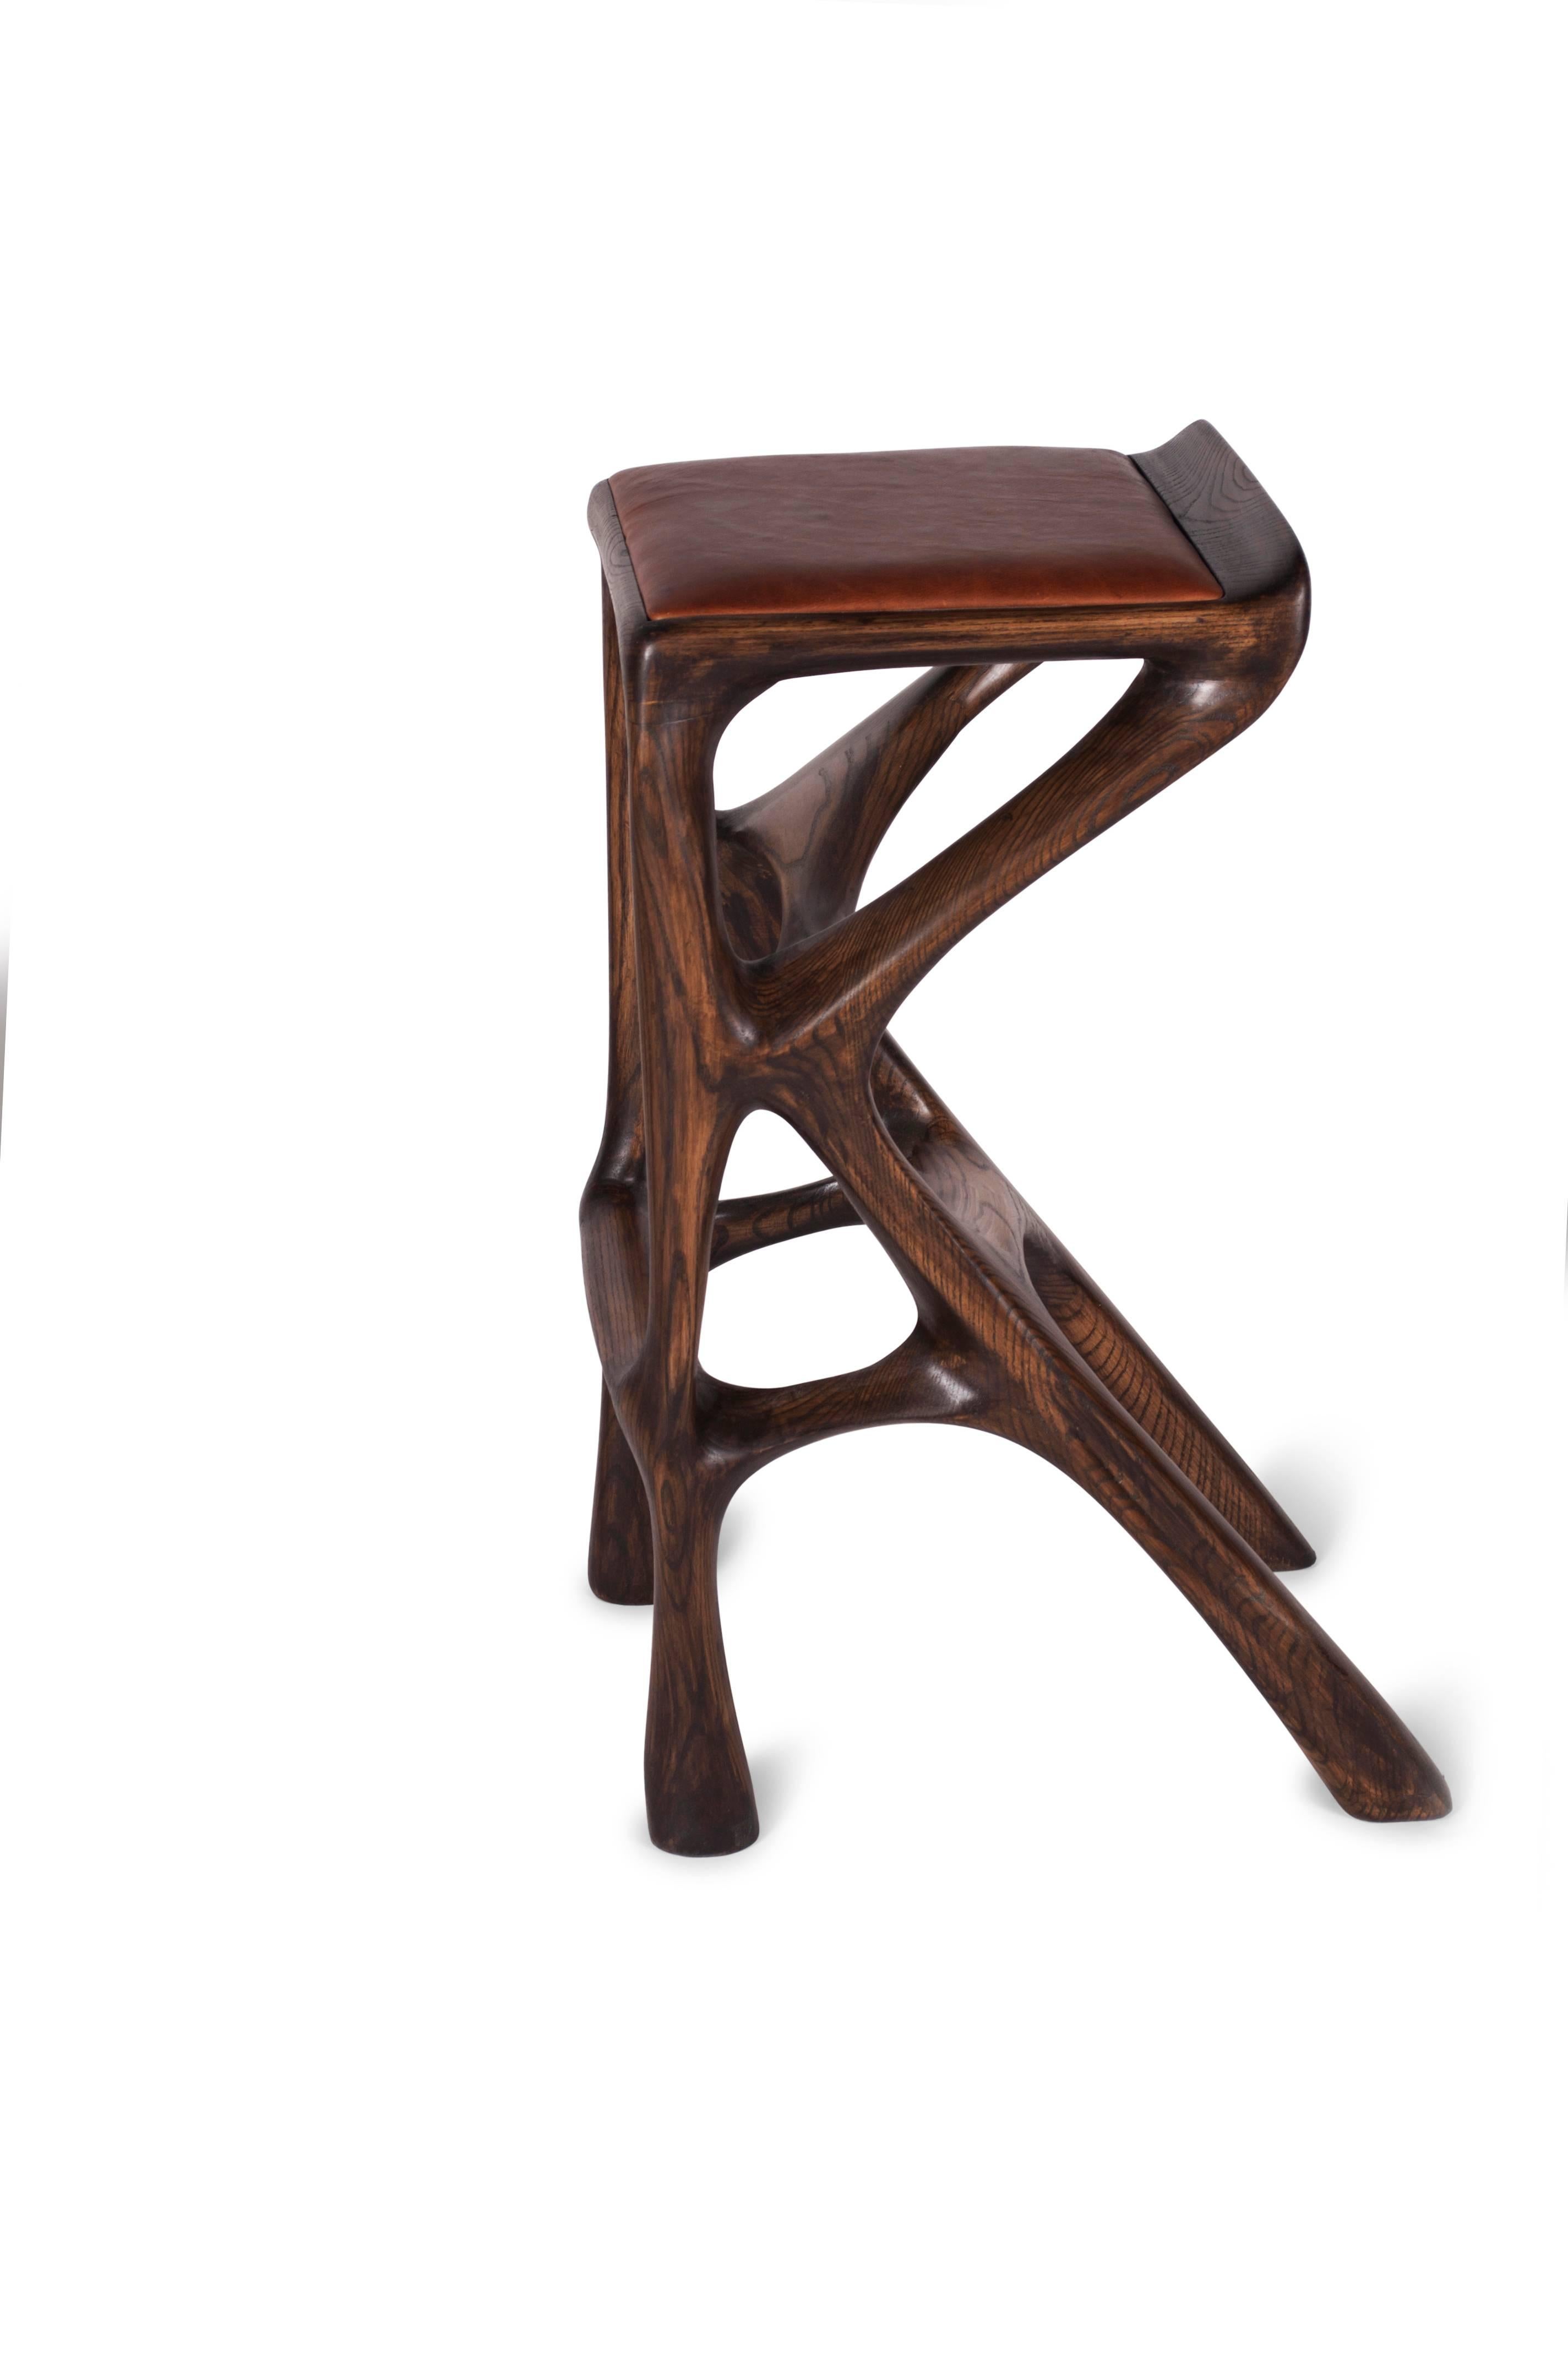 Barstool designed by Amorph made out of solid ash wood and leather. Stain color: Rusted walnut
Dimension 31